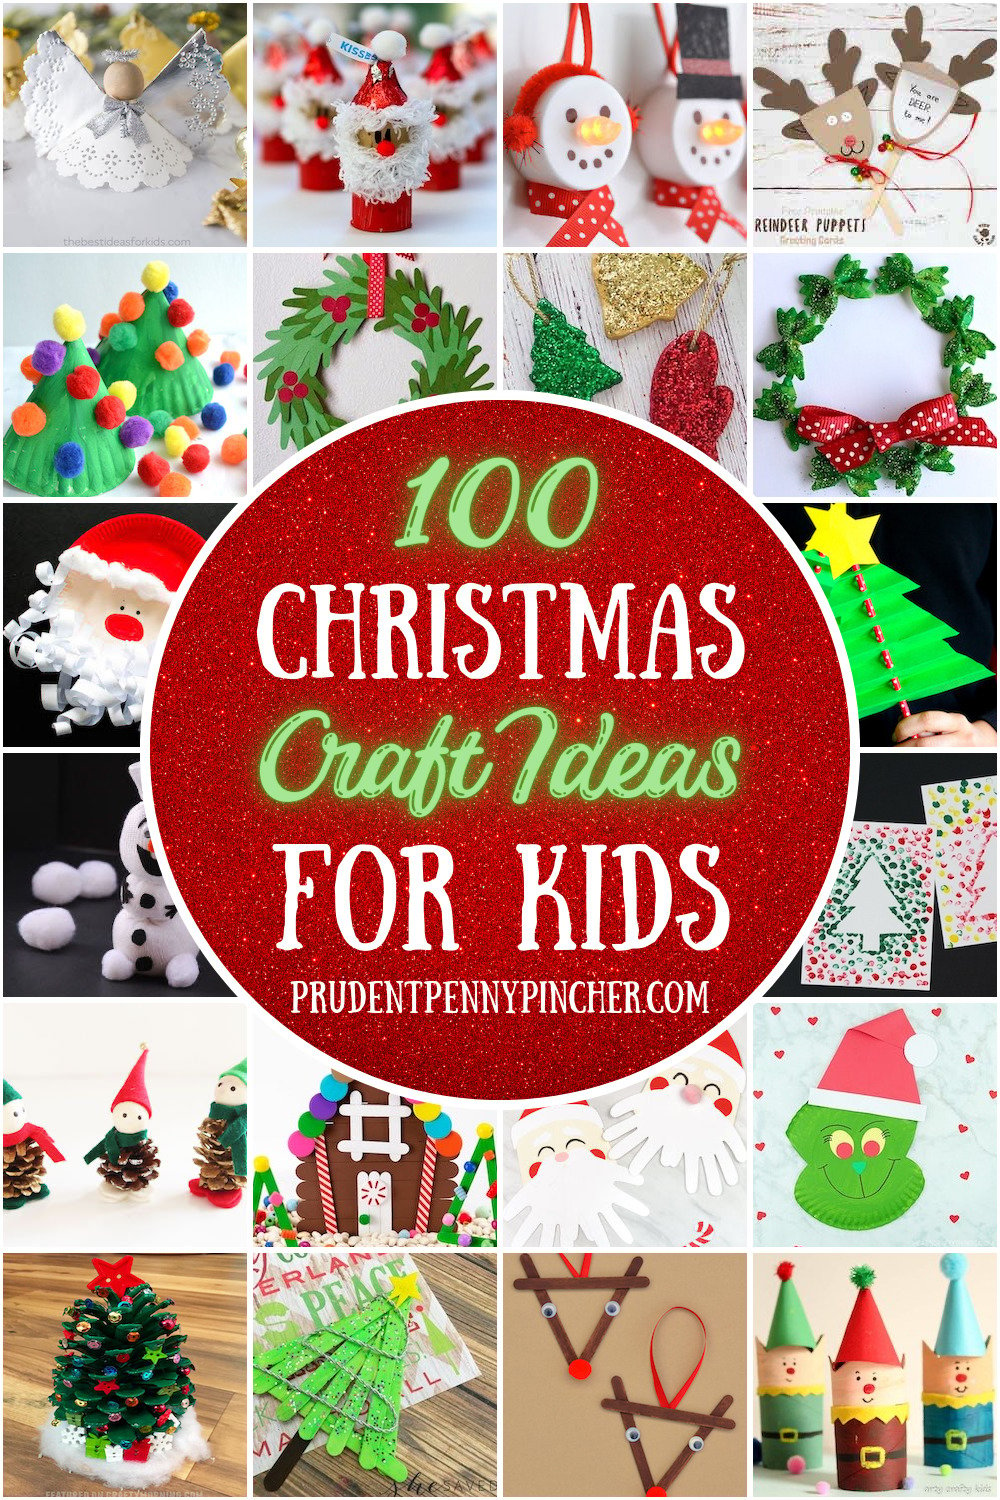 100 Christmas Crafts for Kids - Prudent Penny Pincher